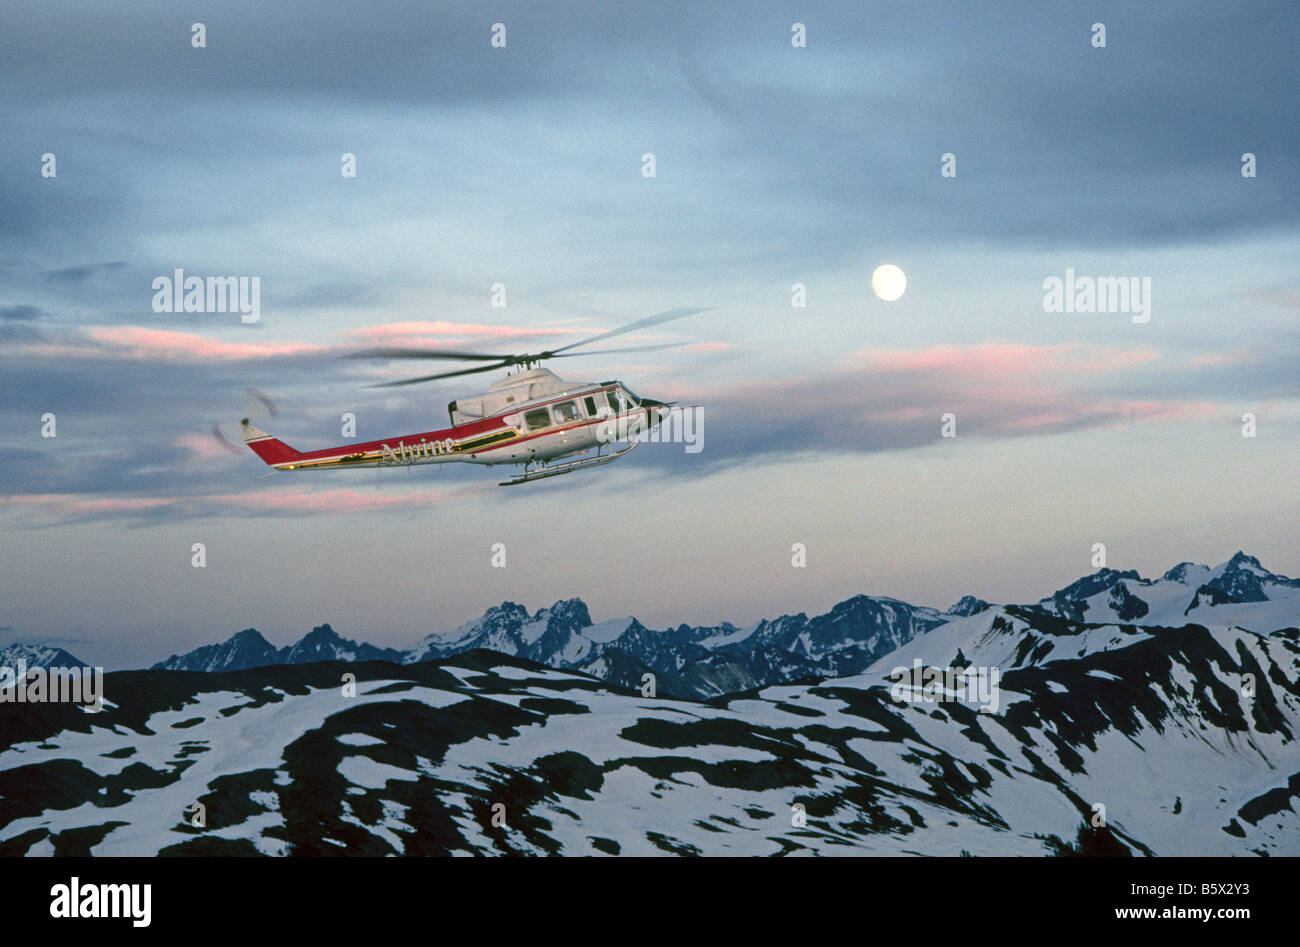 A Canadian helicopter carries hikers out of the Rocky Mountains just before dark as the moon rises in Banff National Park, Alberta, Canada. Stock Photo